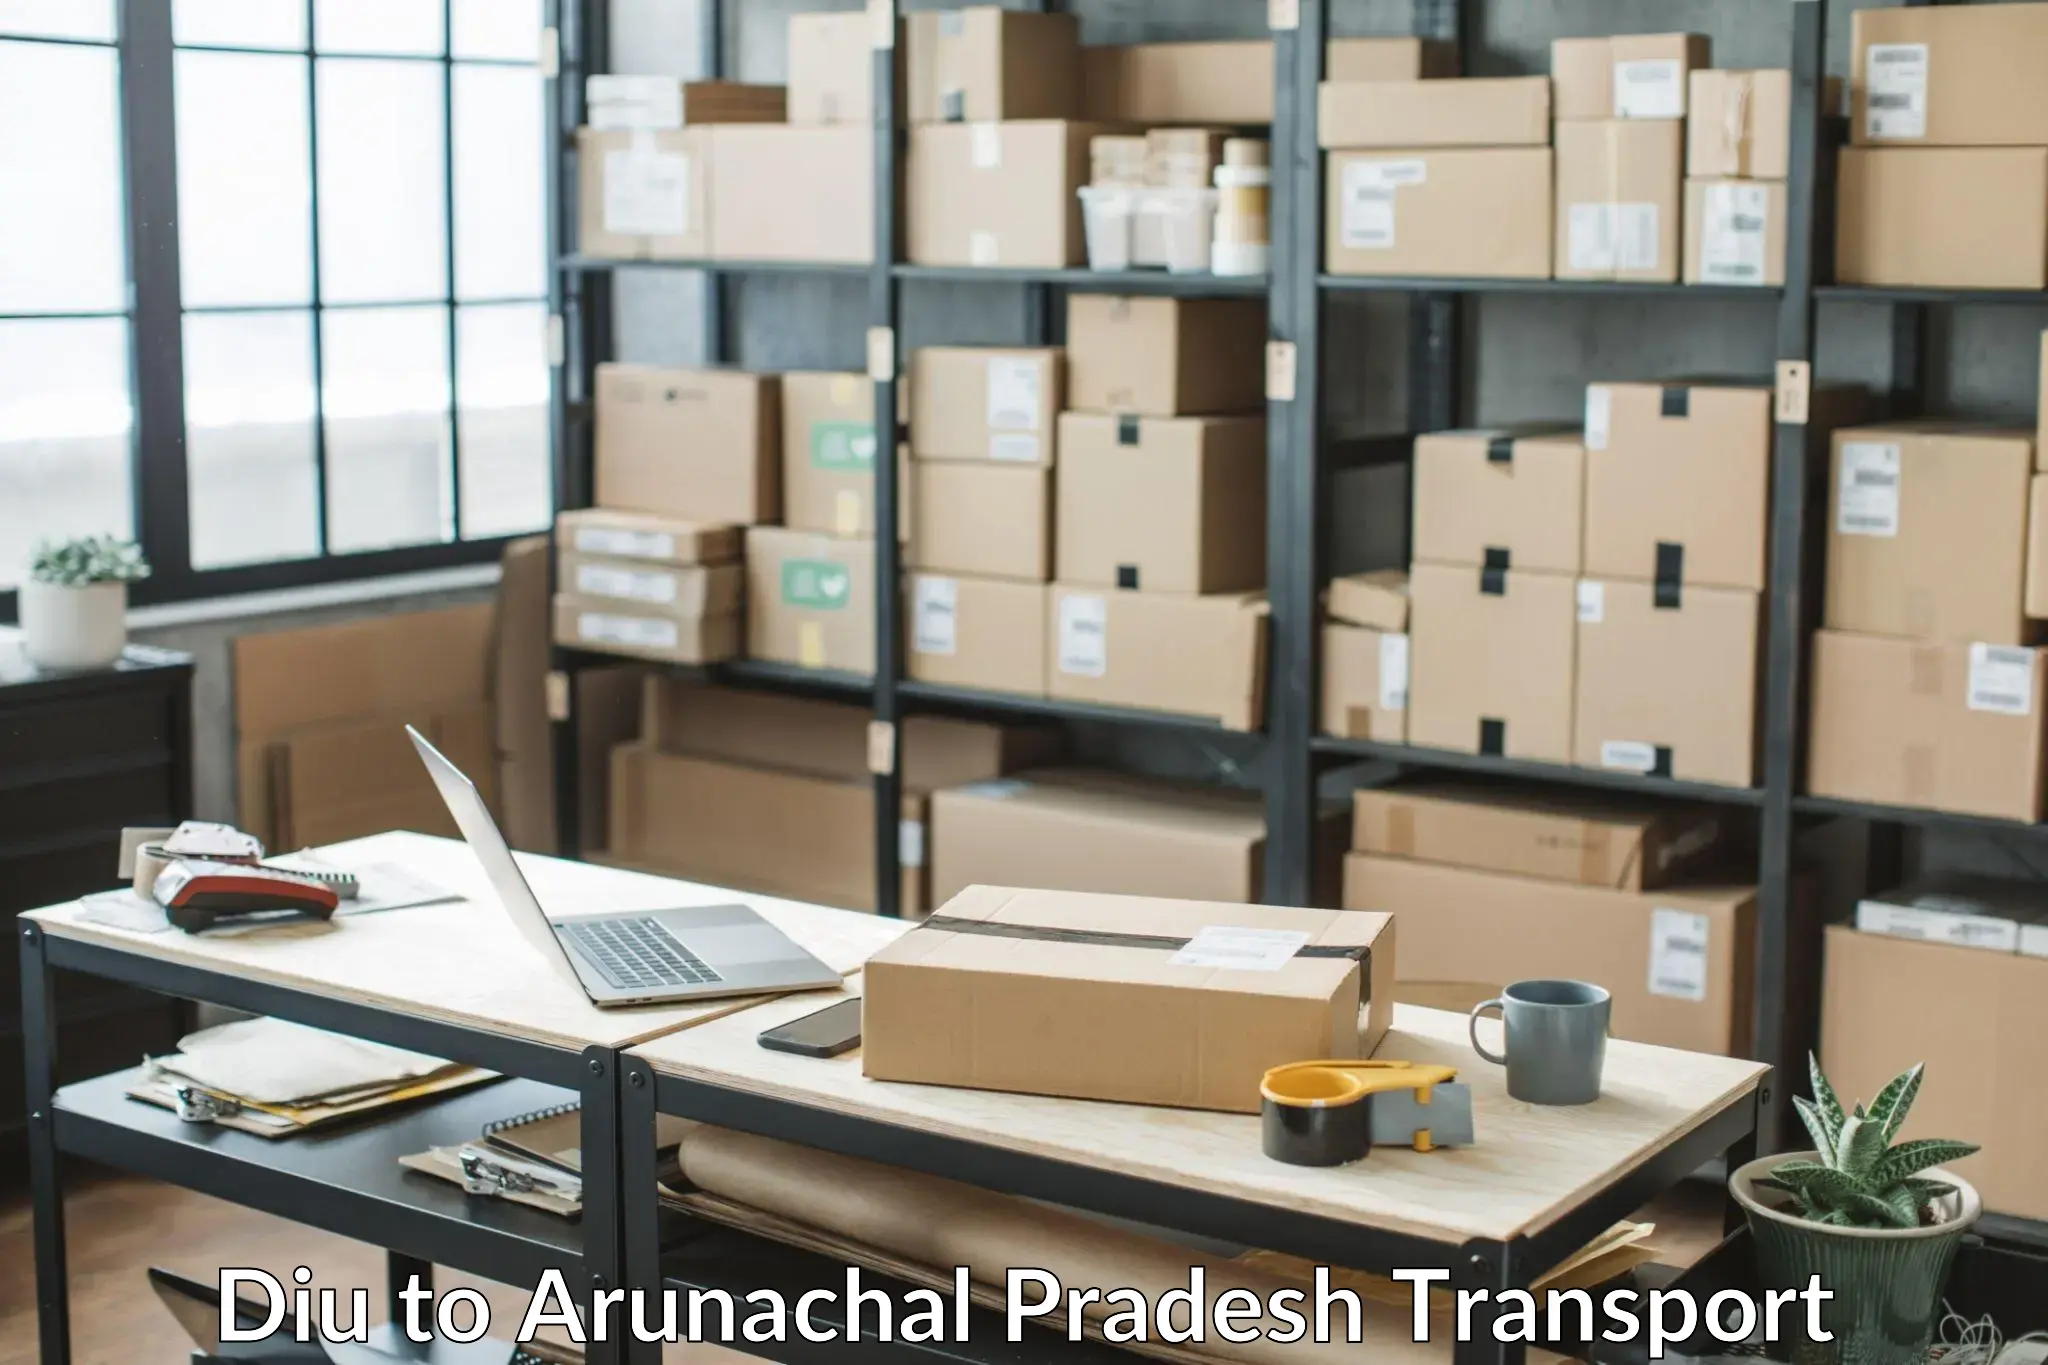 Transport bike from one state to another Diu to Arunachal Pradesh